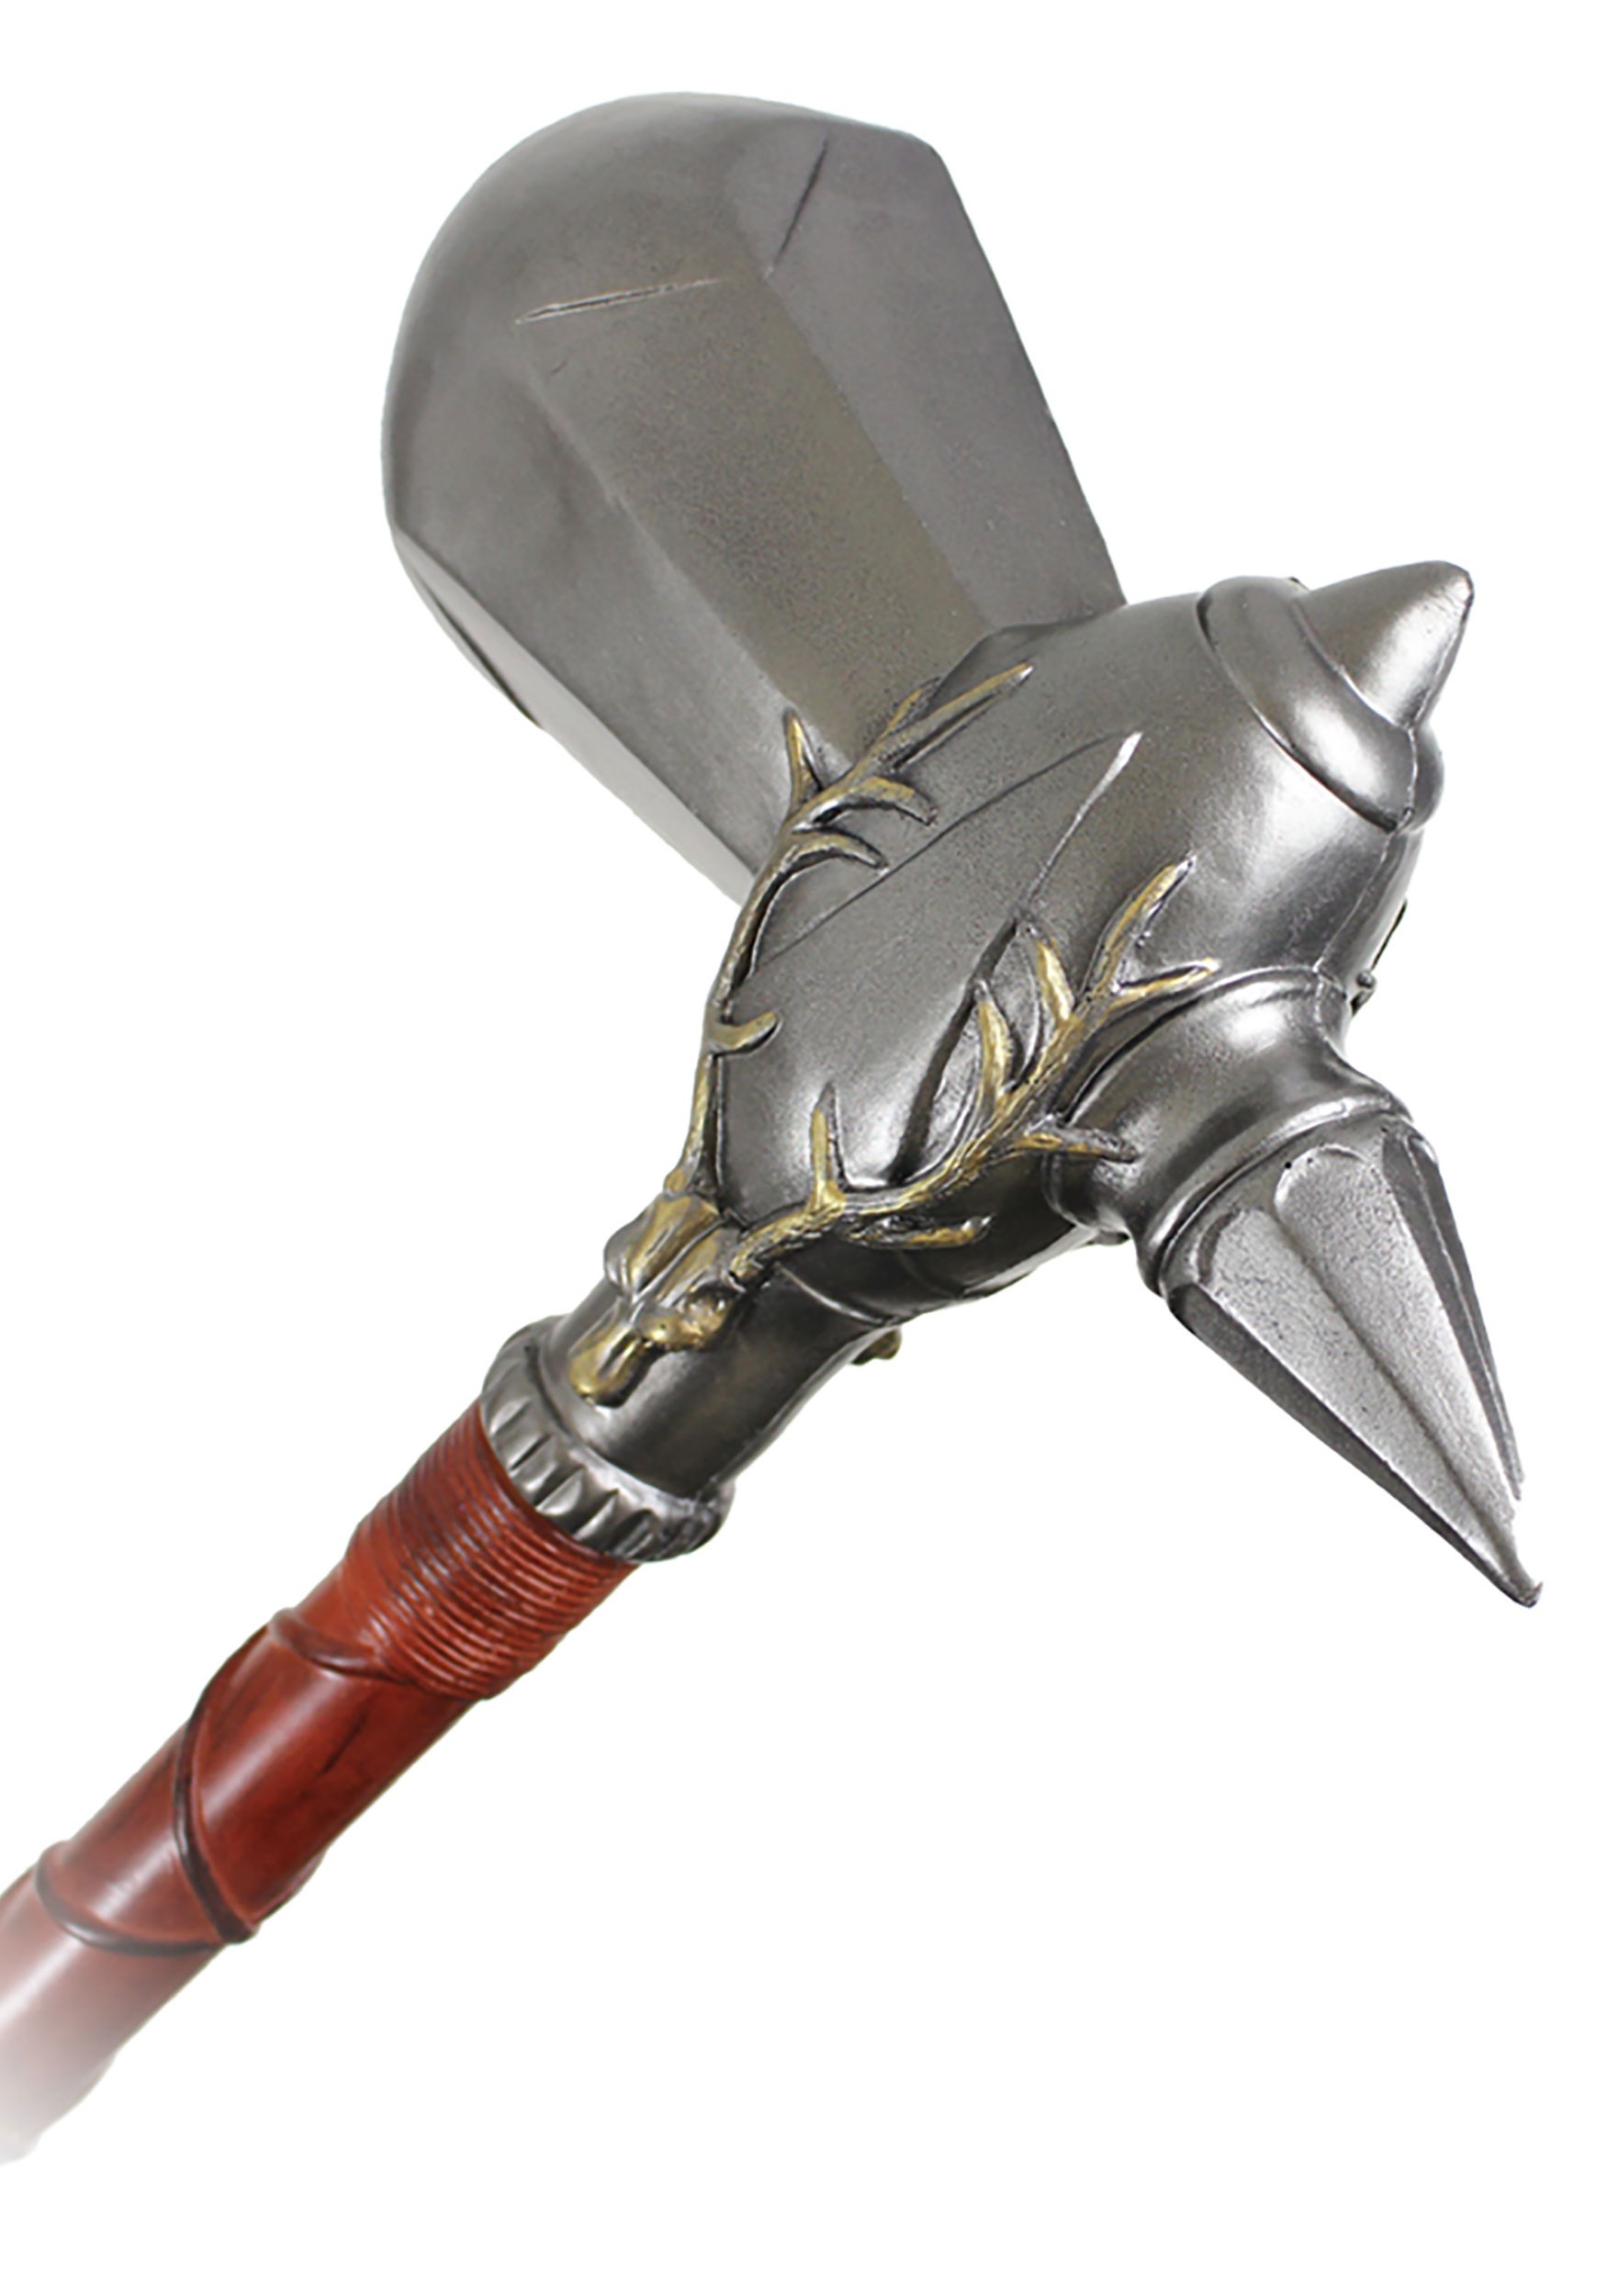 Game Of Thrones Gendry's Foam Warhammer Toy Weapon